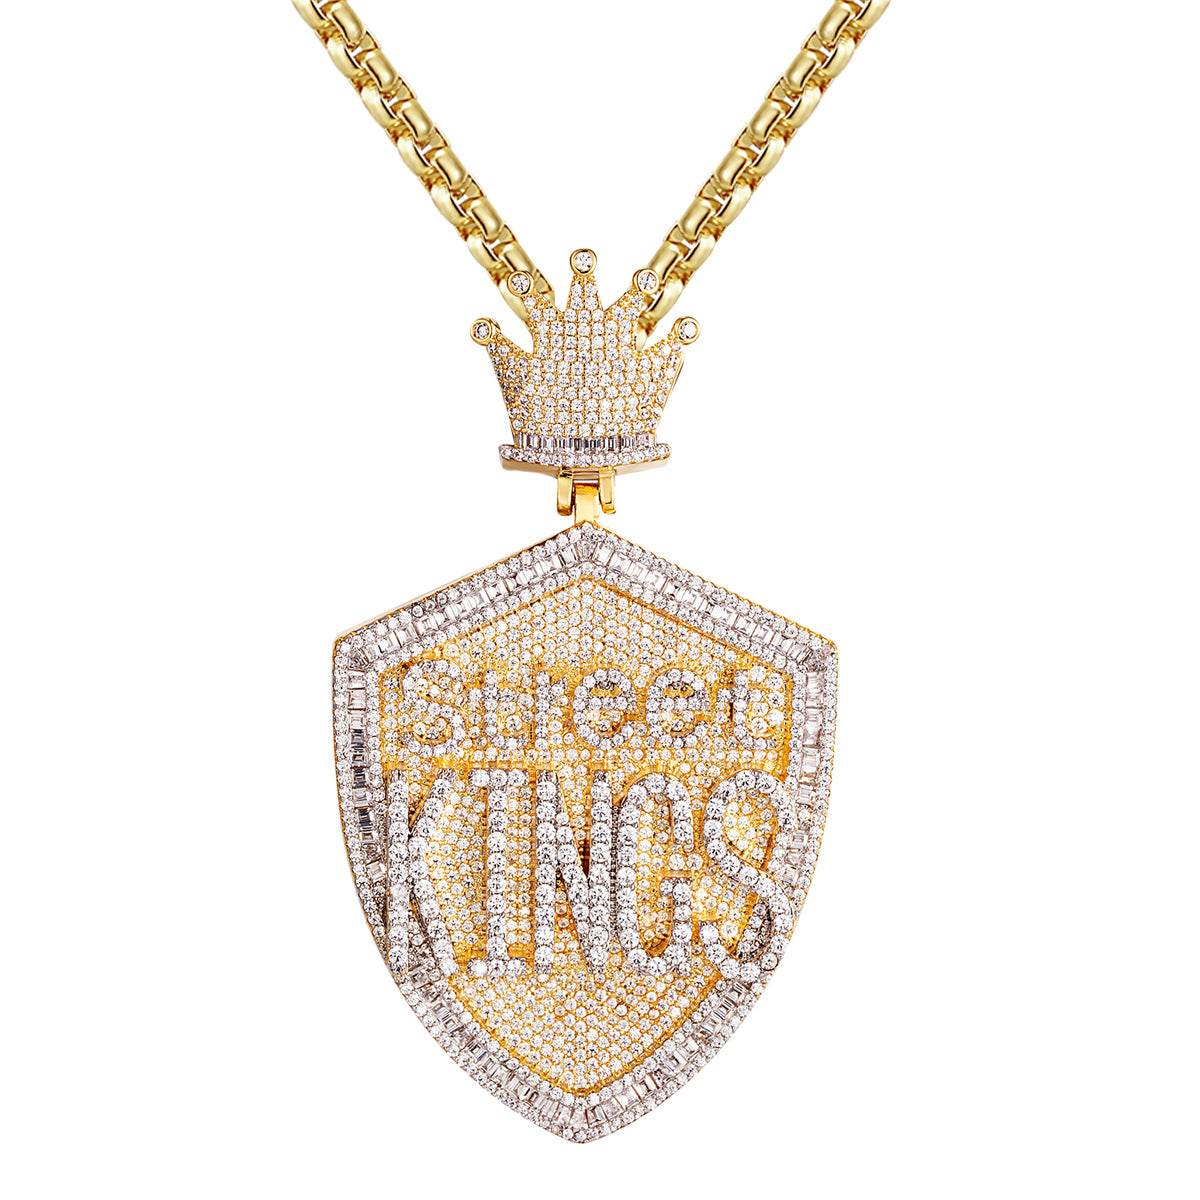 Street Kings Crown Micro Pave Iced Out Custom Mens Pendant